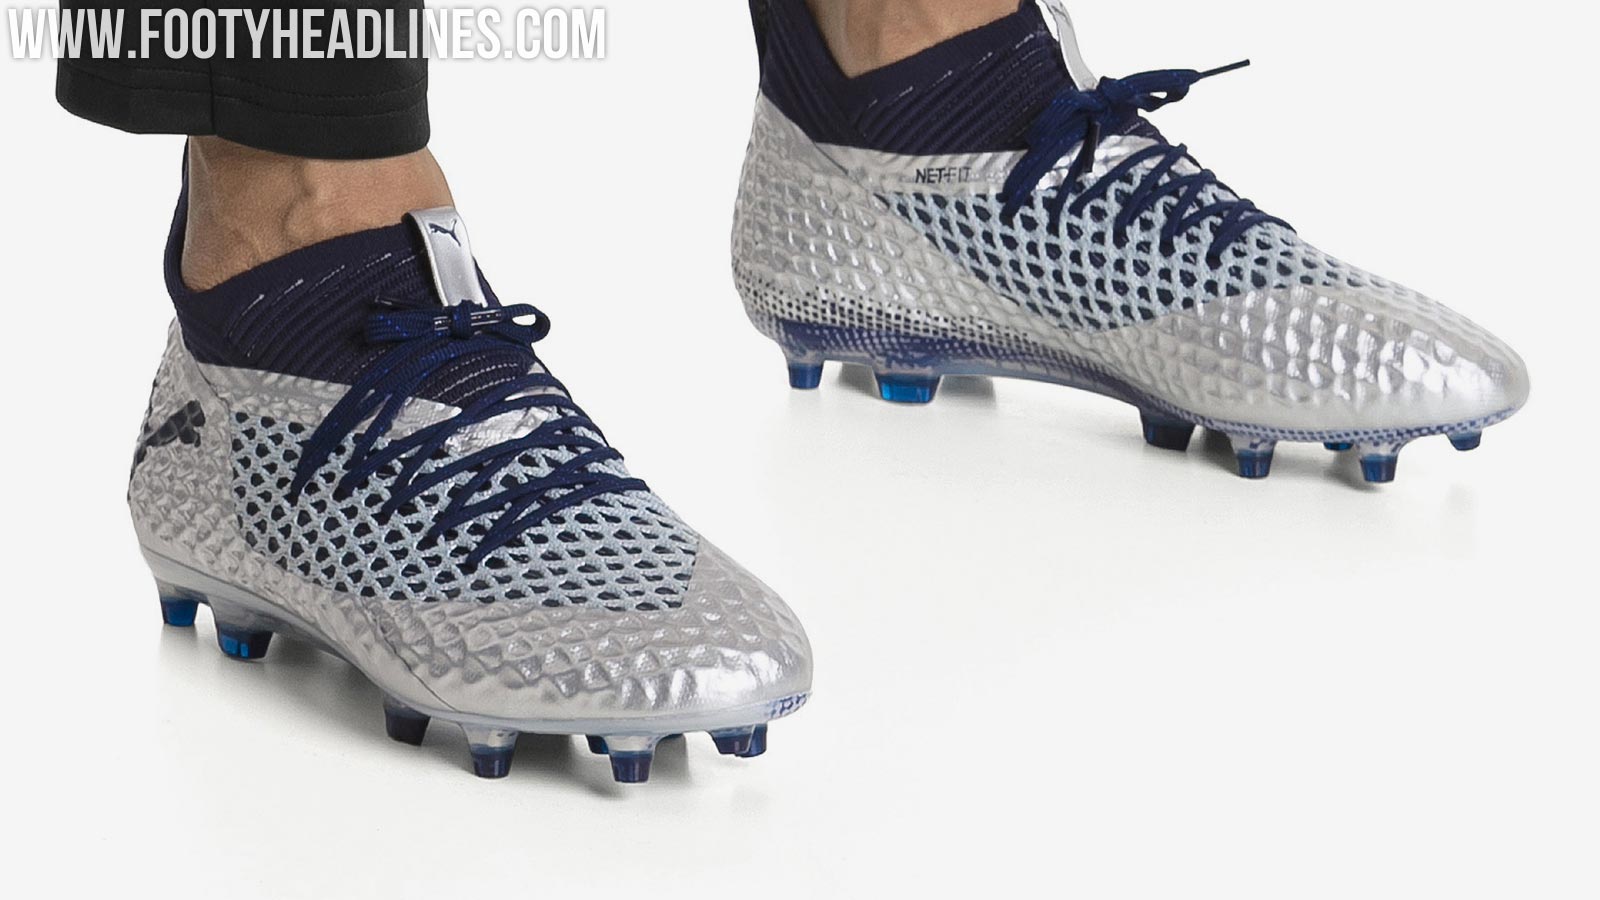 Silver / Navy Puma Future 2 Netfit 'Stun Pack' Boots Leaked - Footy